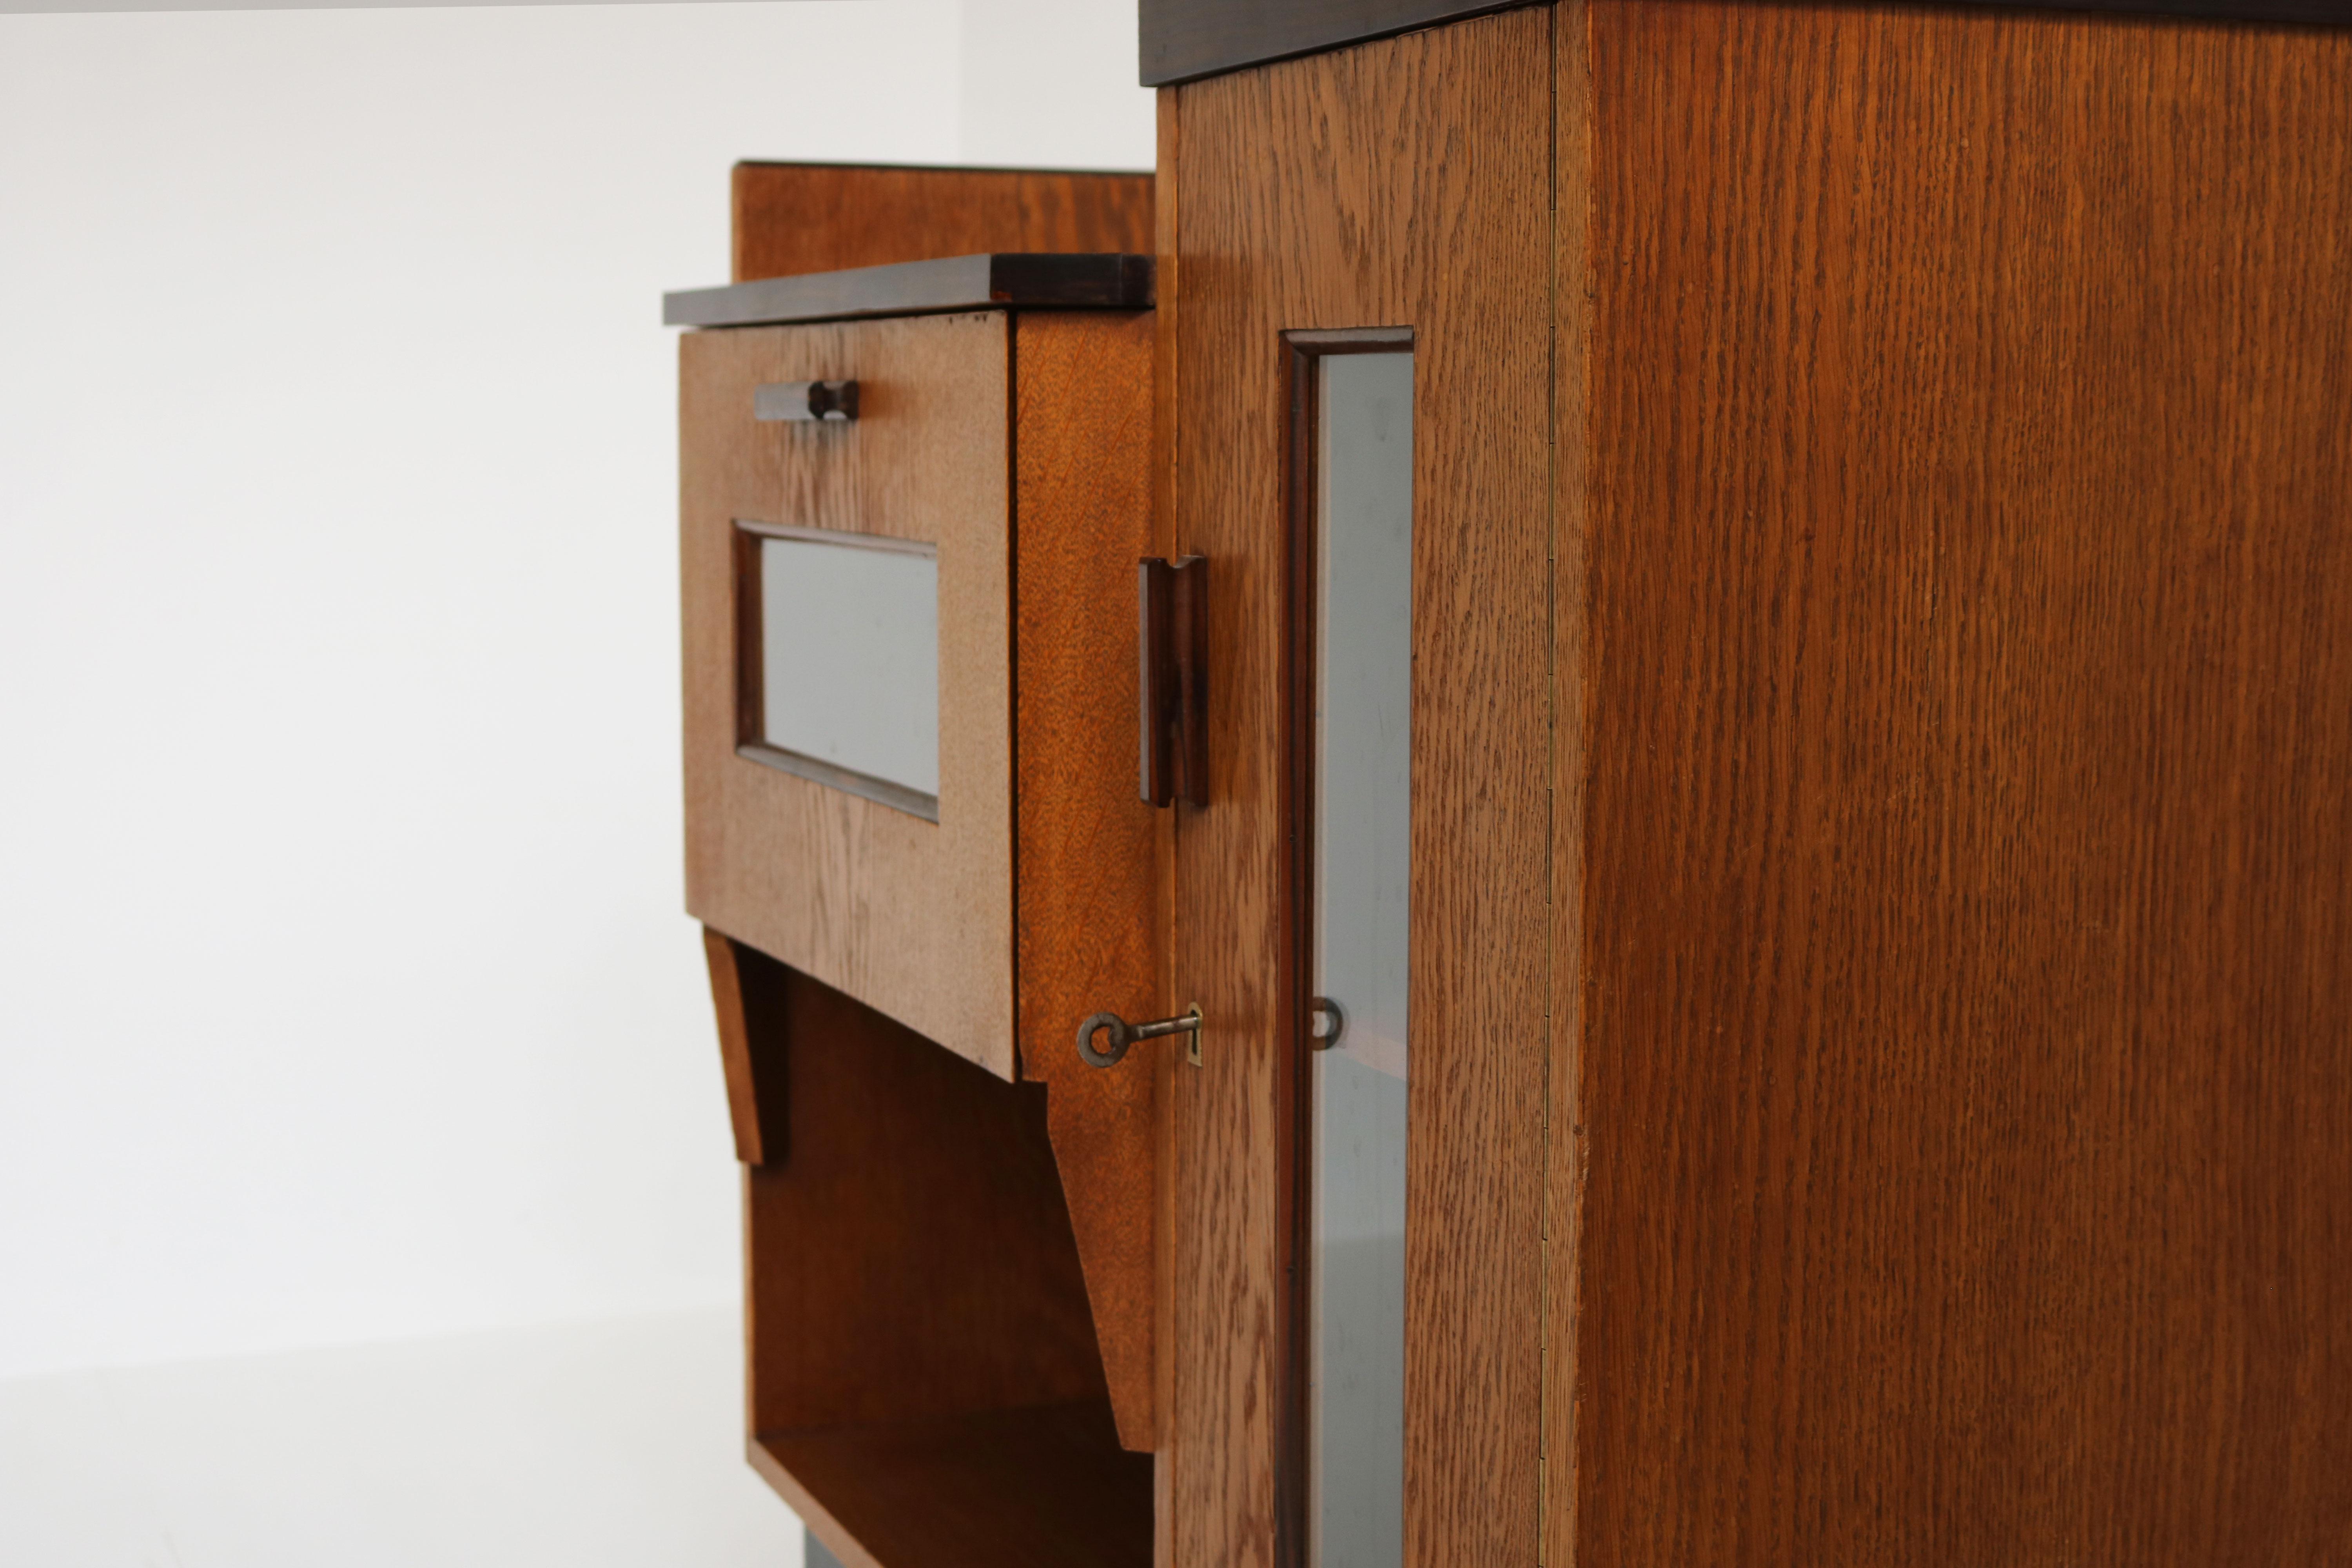 Stunning & clean! This 1920 Dutch Art Deco design Tea cabinet / sideboard by P.E.L Izeren for Genneper Molen furniture factory in Amsterdam School Design style. 
Exquisite square Art Deco shapes with European Oak an ebonized base &